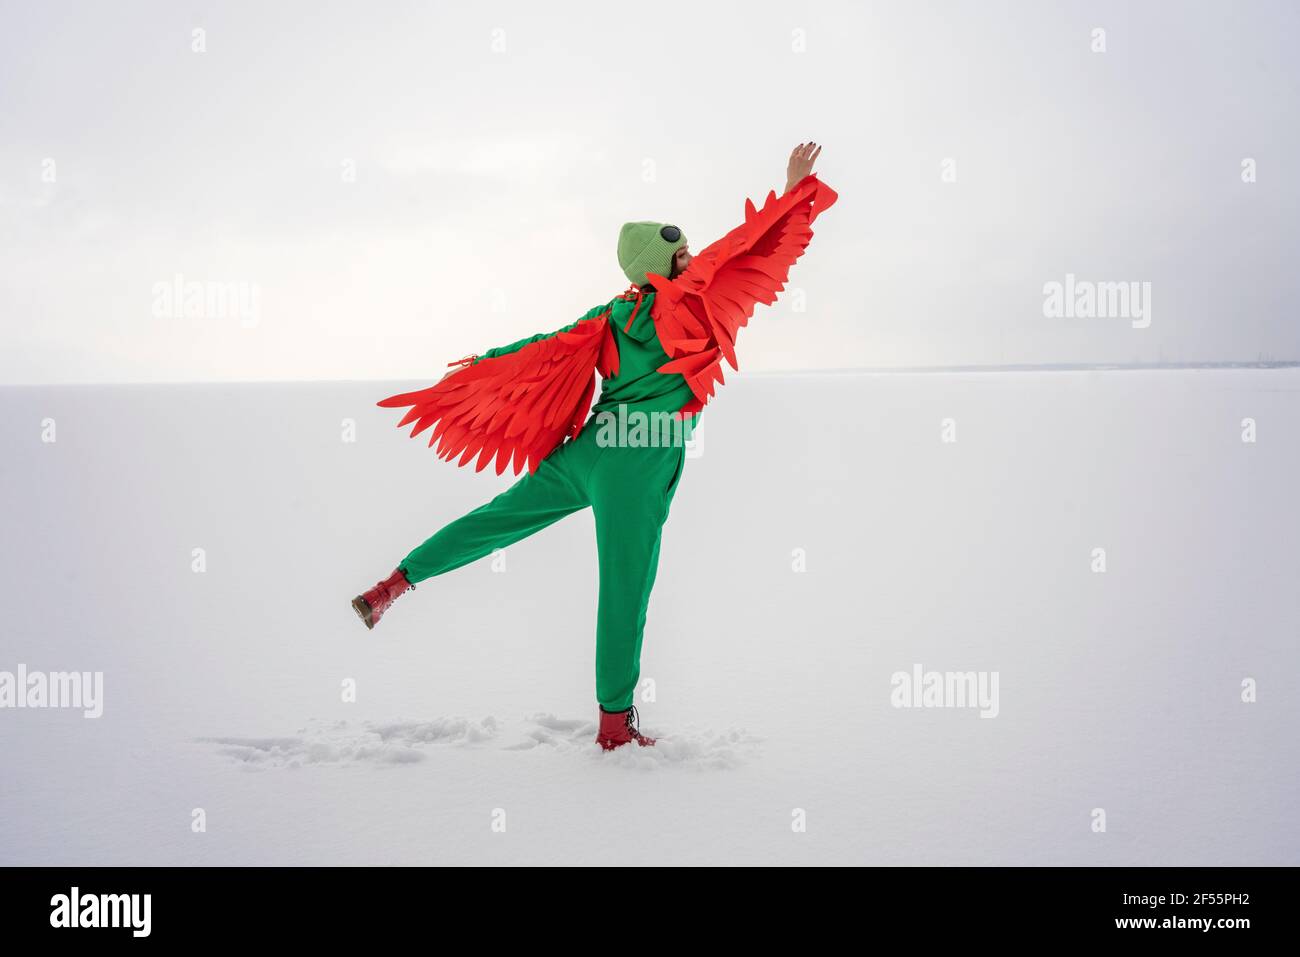 Woman with wings flying on snow while wearing bird's costume Stock Photo